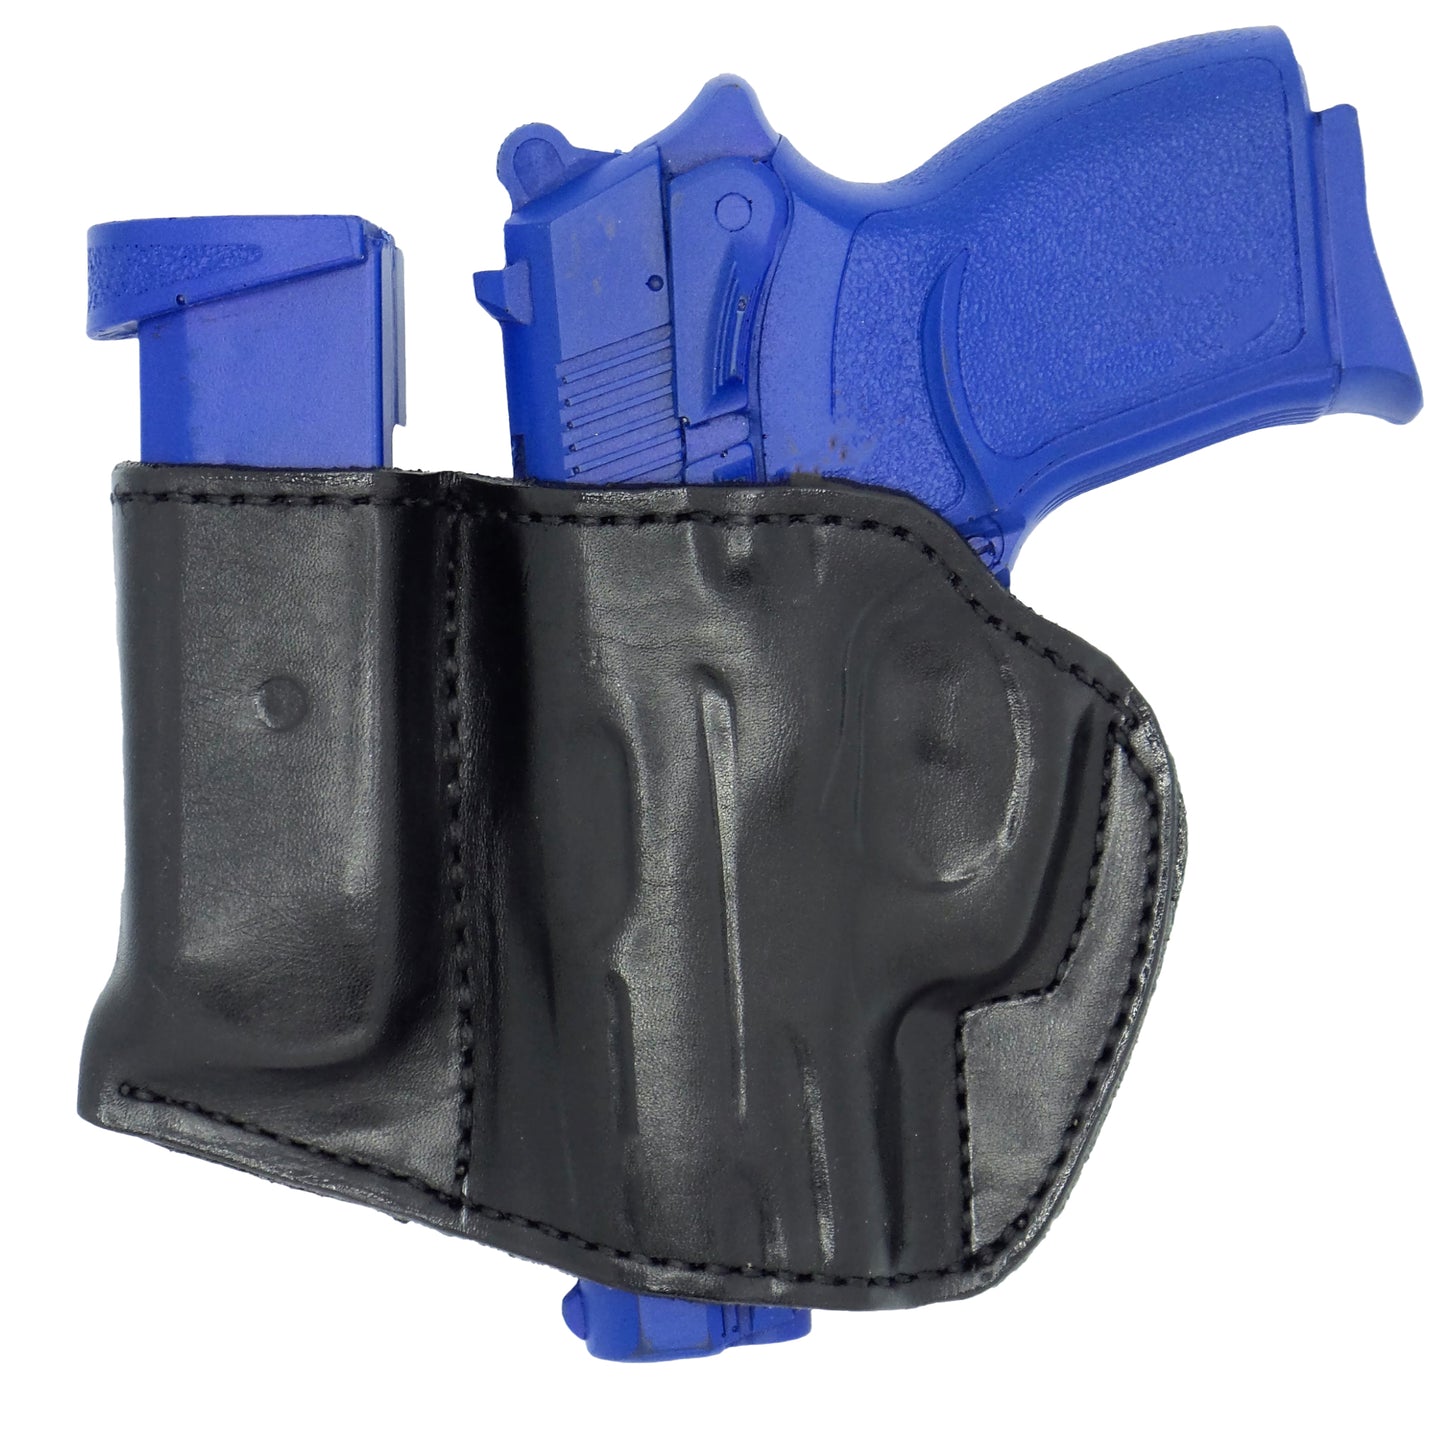 Smith & Wesson CS9 Chiefs Special 9mm  Holster and Mag Pouch Combo | OWB Leather Belt Holster